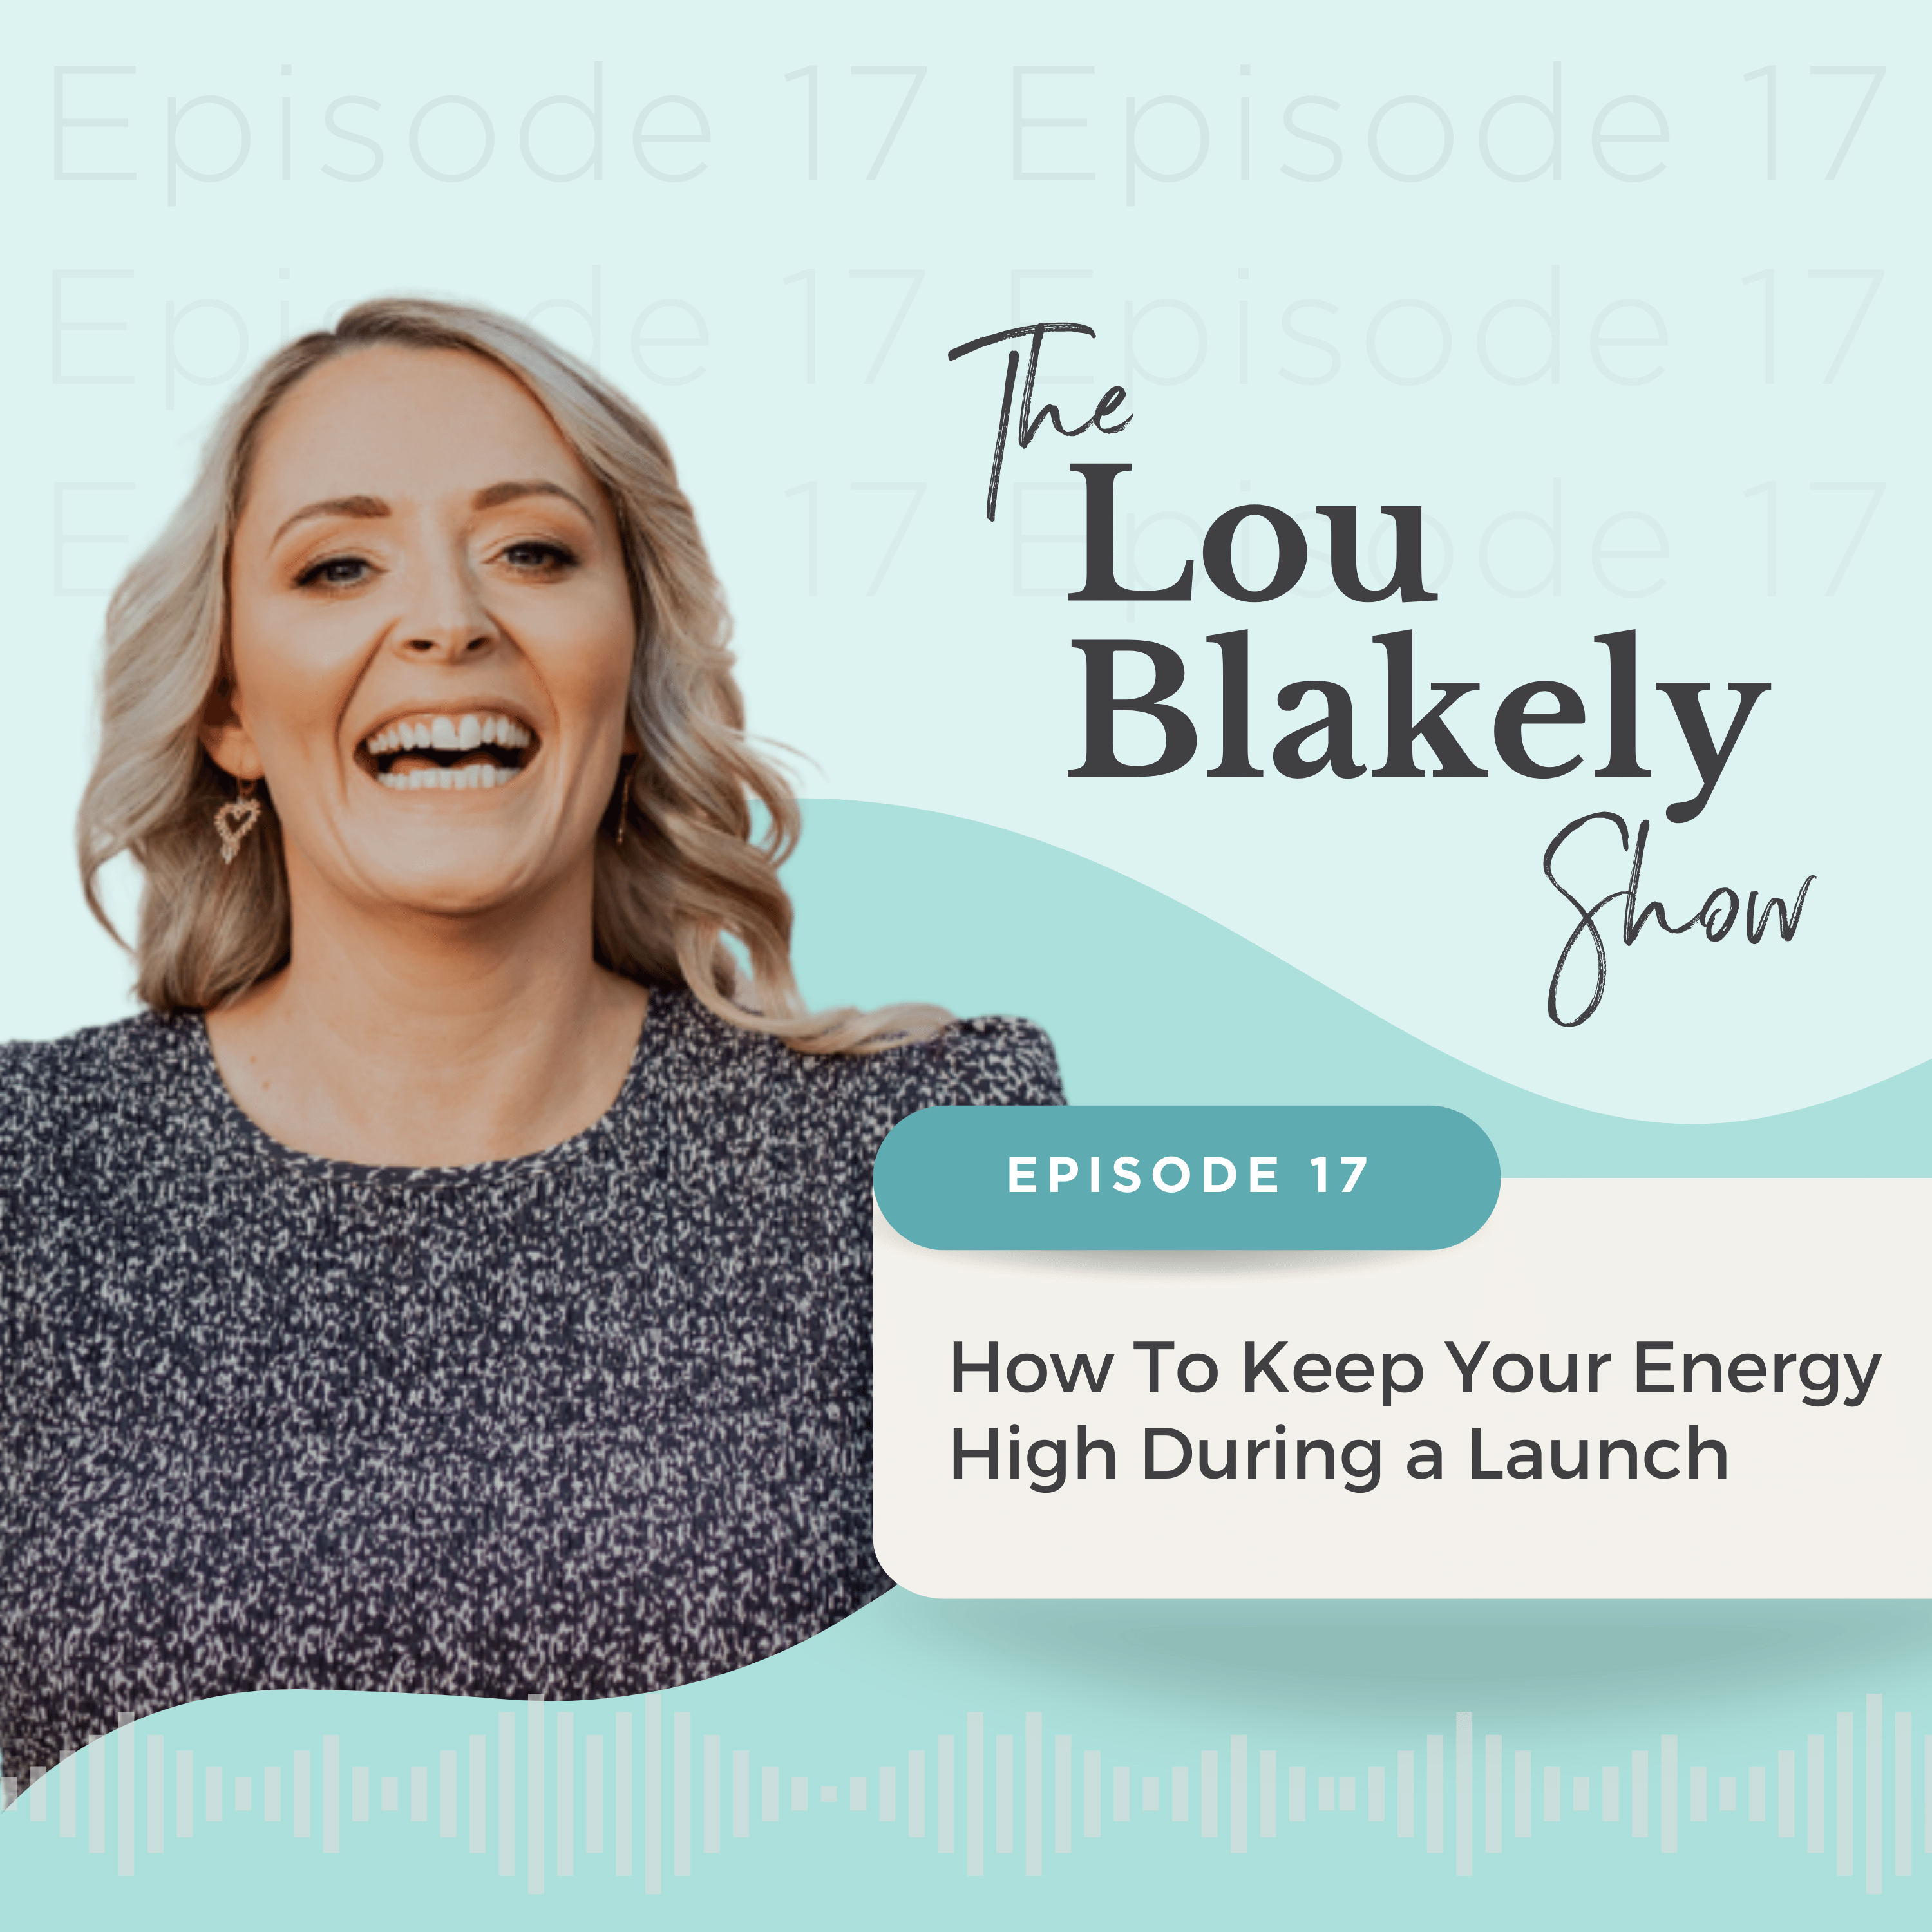 How to keep your energy up during a launch - The Lou Blakely Show